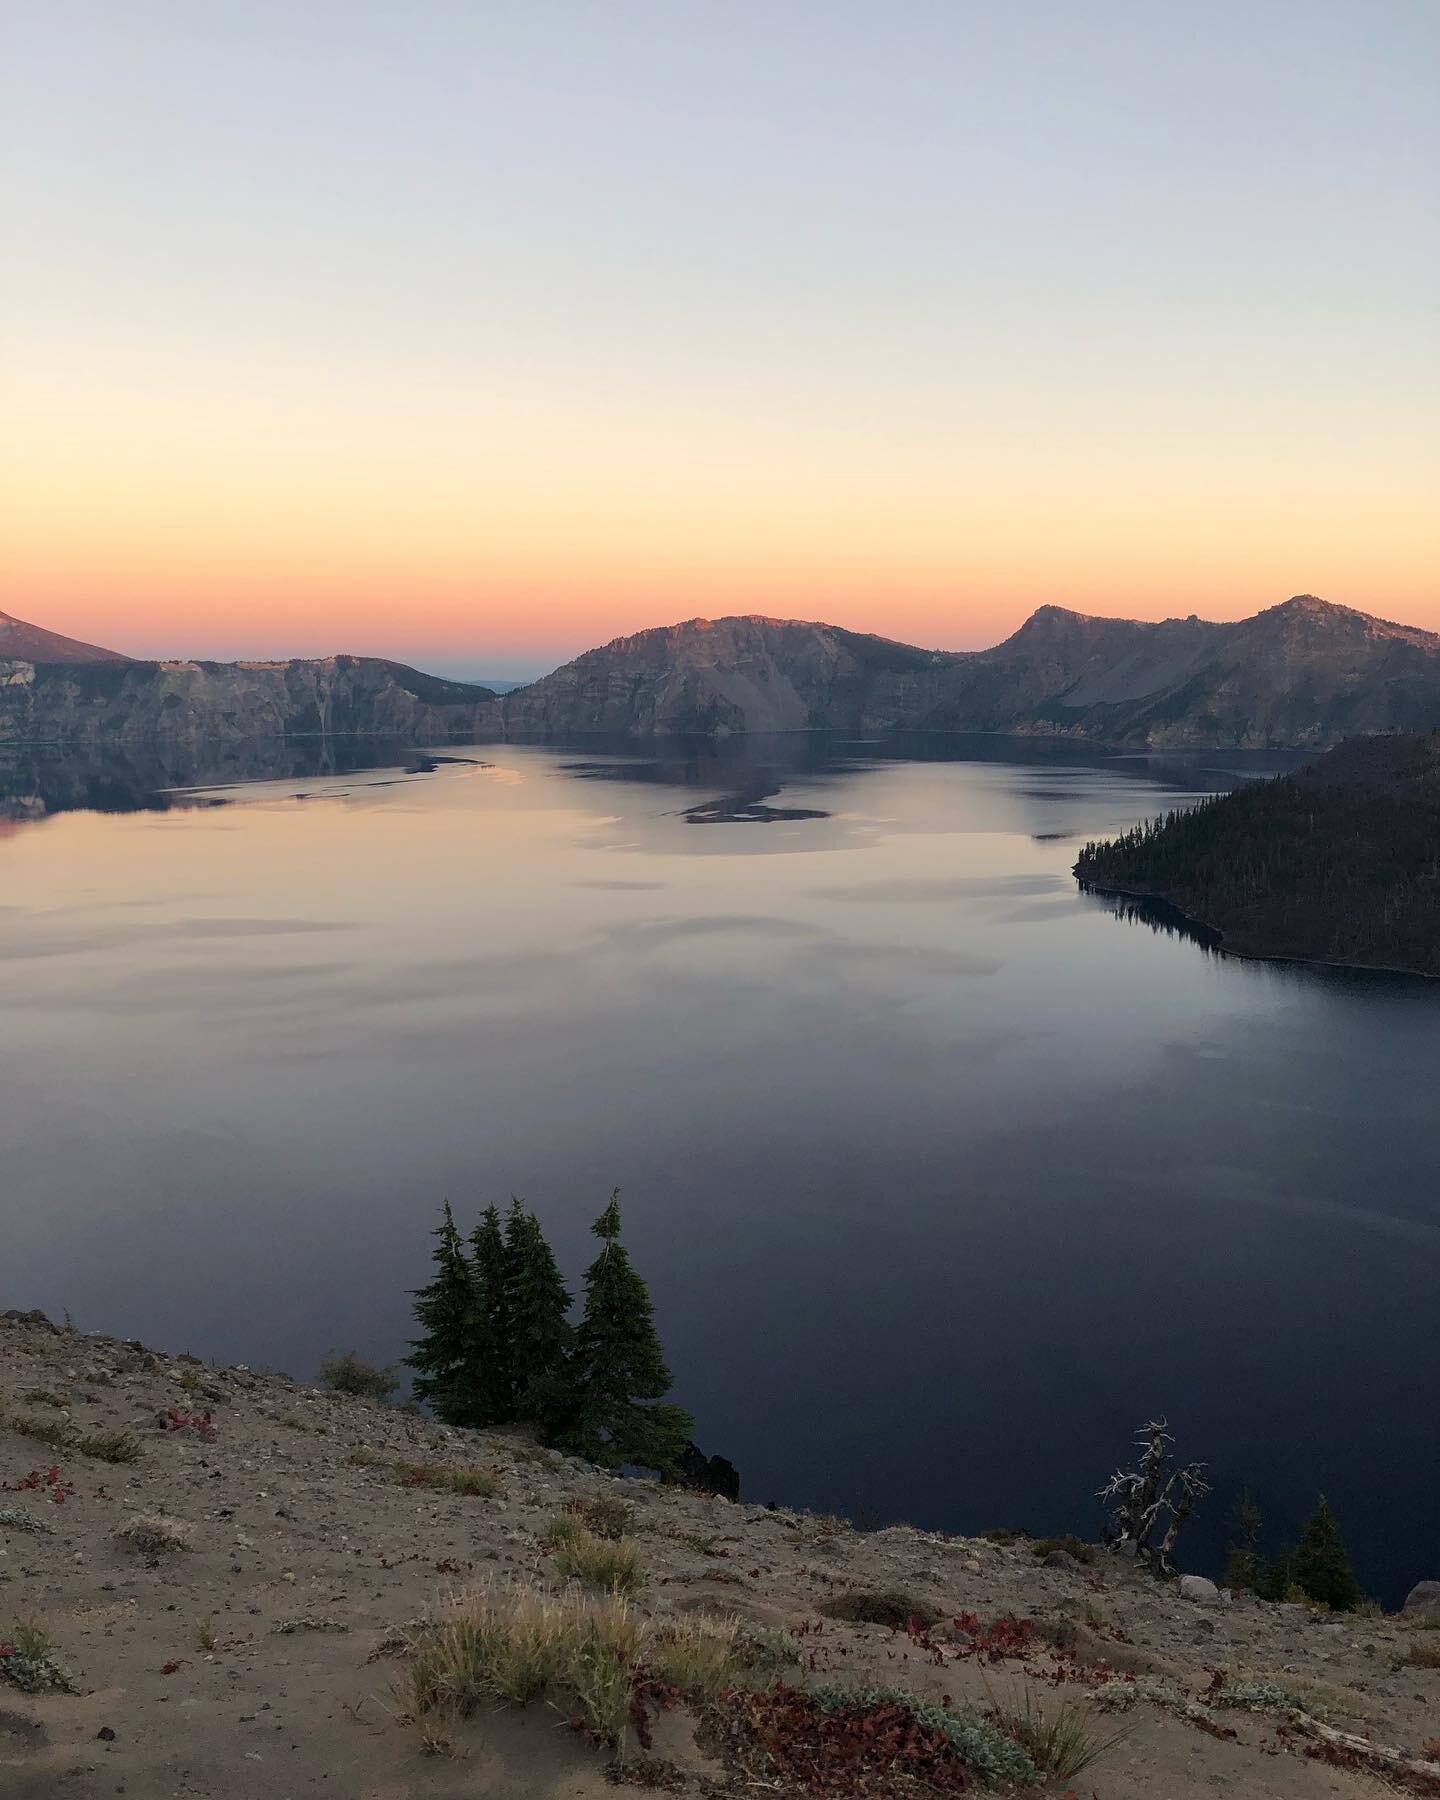 Can we take greatness for granted?

admittedly, on a personal level, absolutely.

Far too often I take for granted some really great things in life. Just this past weekend, I visited crater Lake with my family. Wow!  We are blessed to live in a count